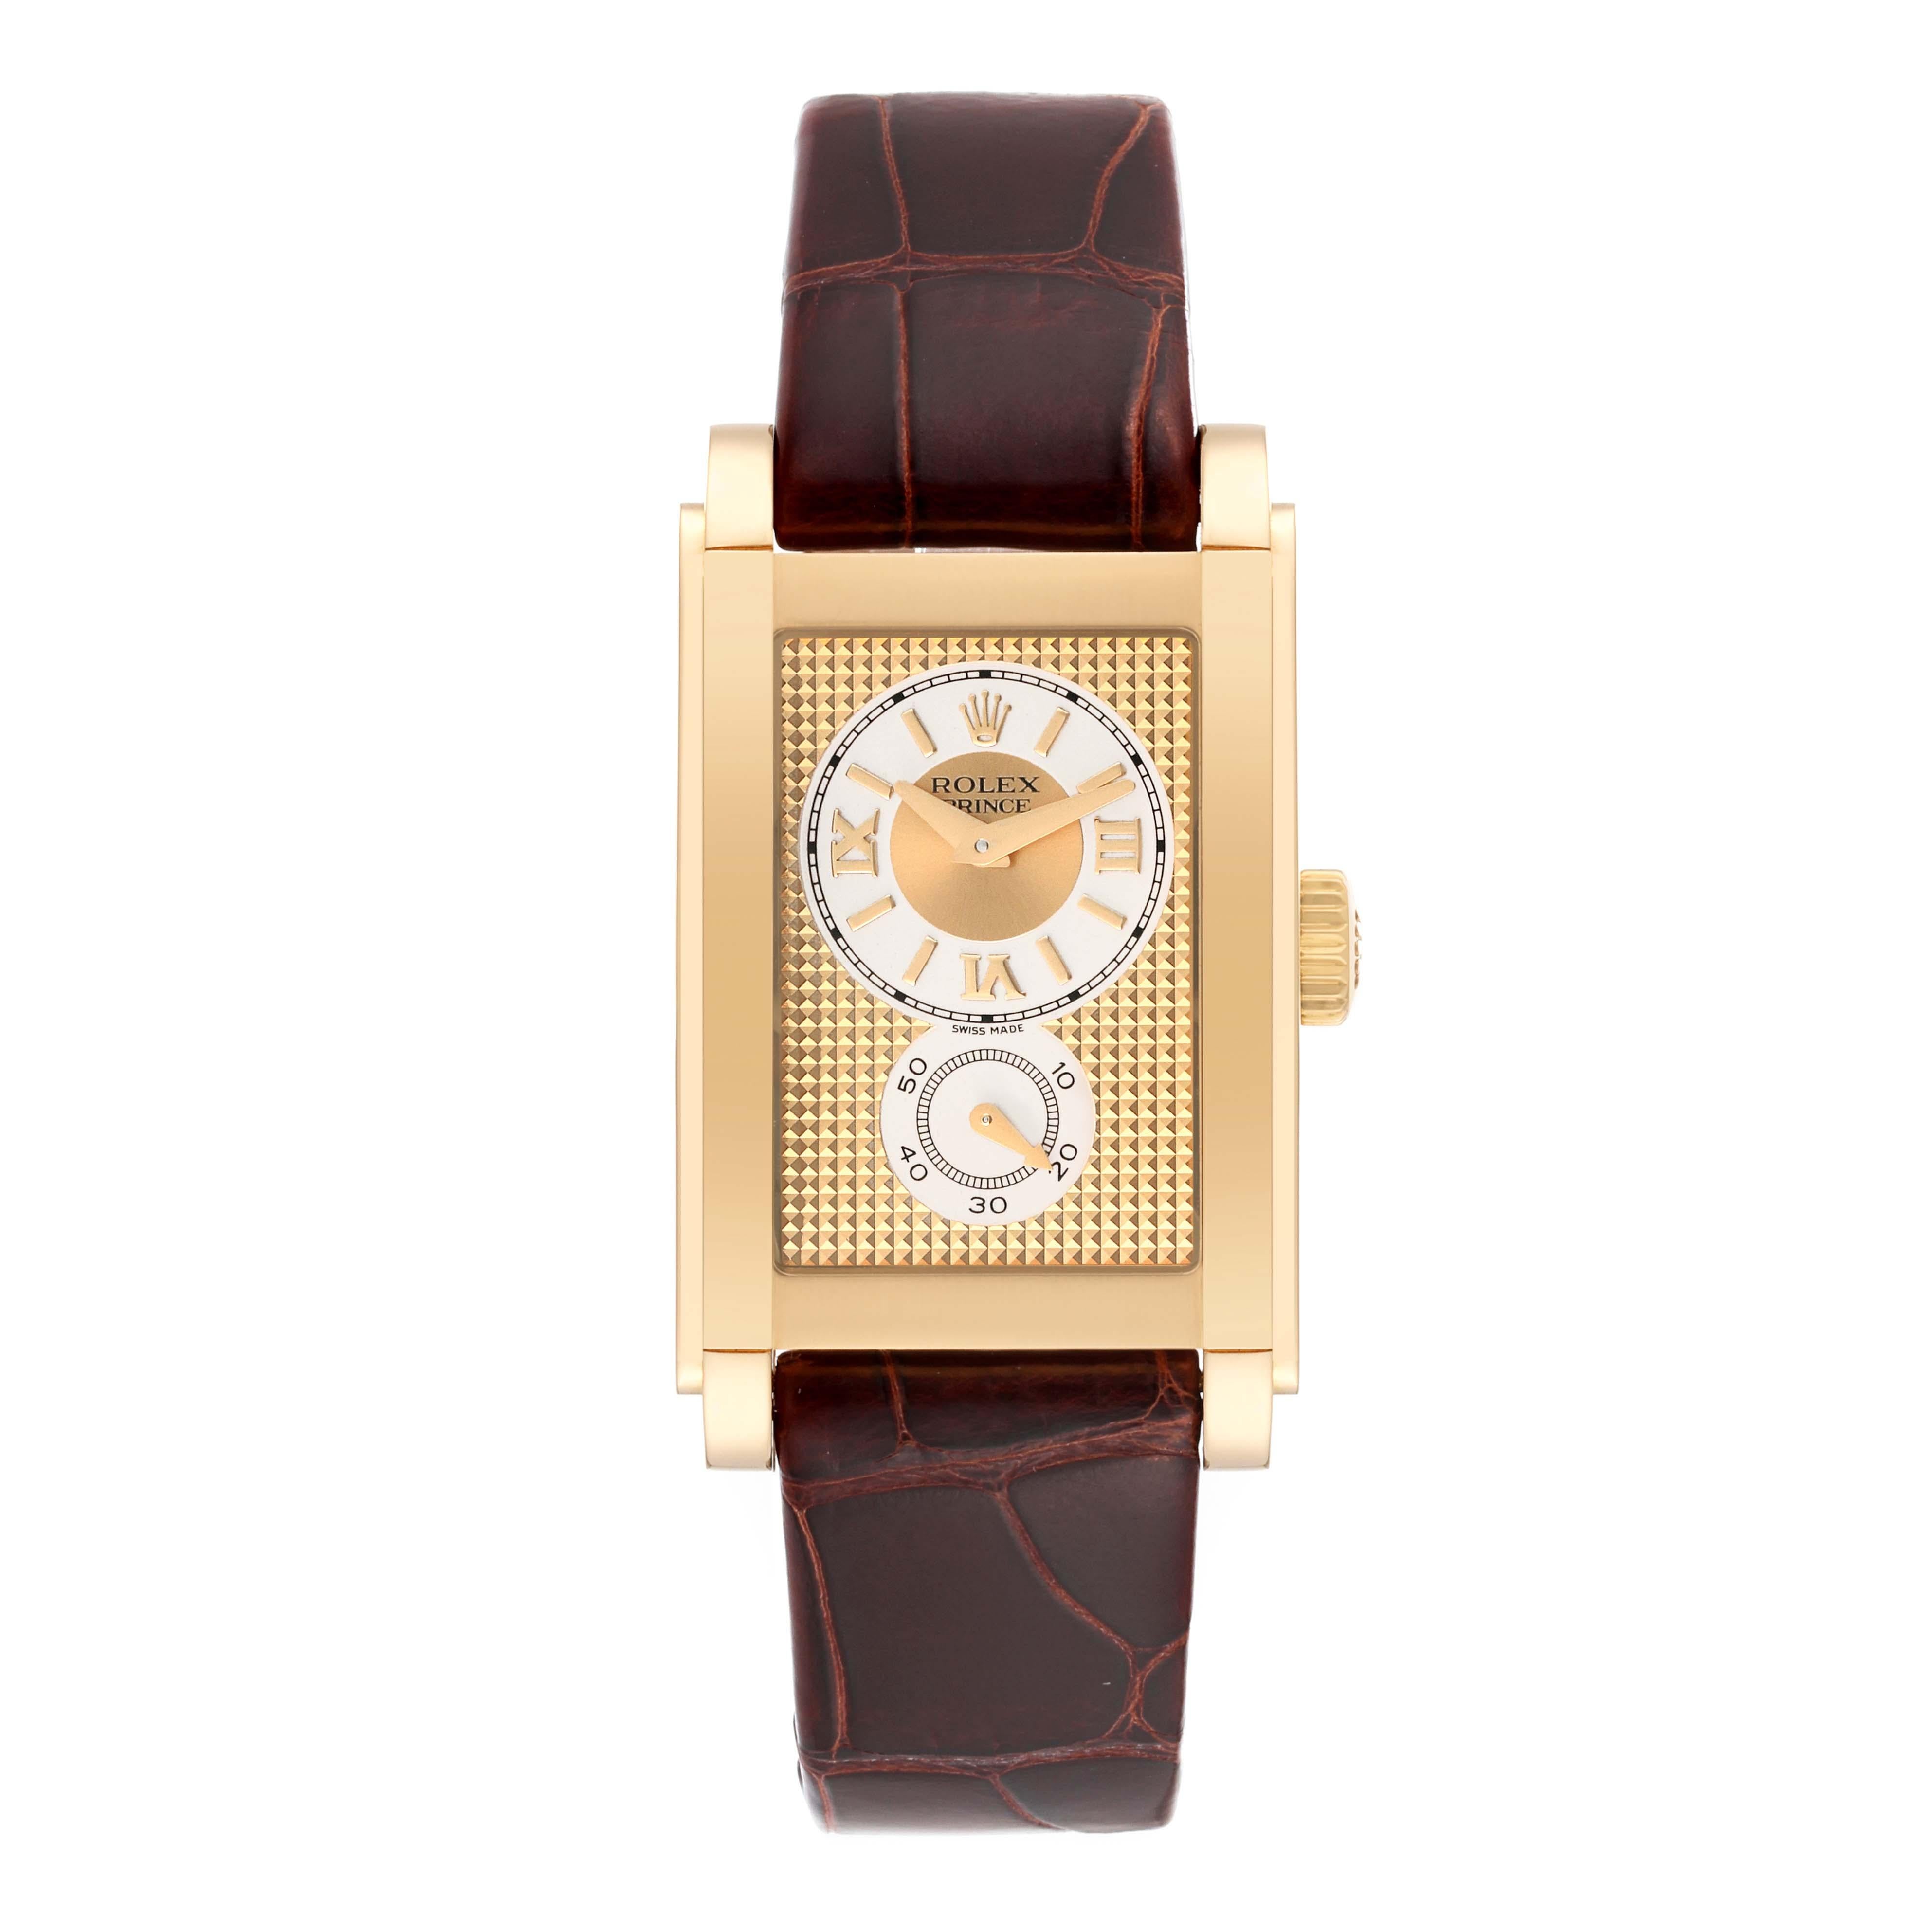 Rolex Cellini Prince Yellow Gold Champagne Roman Dial Mens Watch 5440 Box Card 4